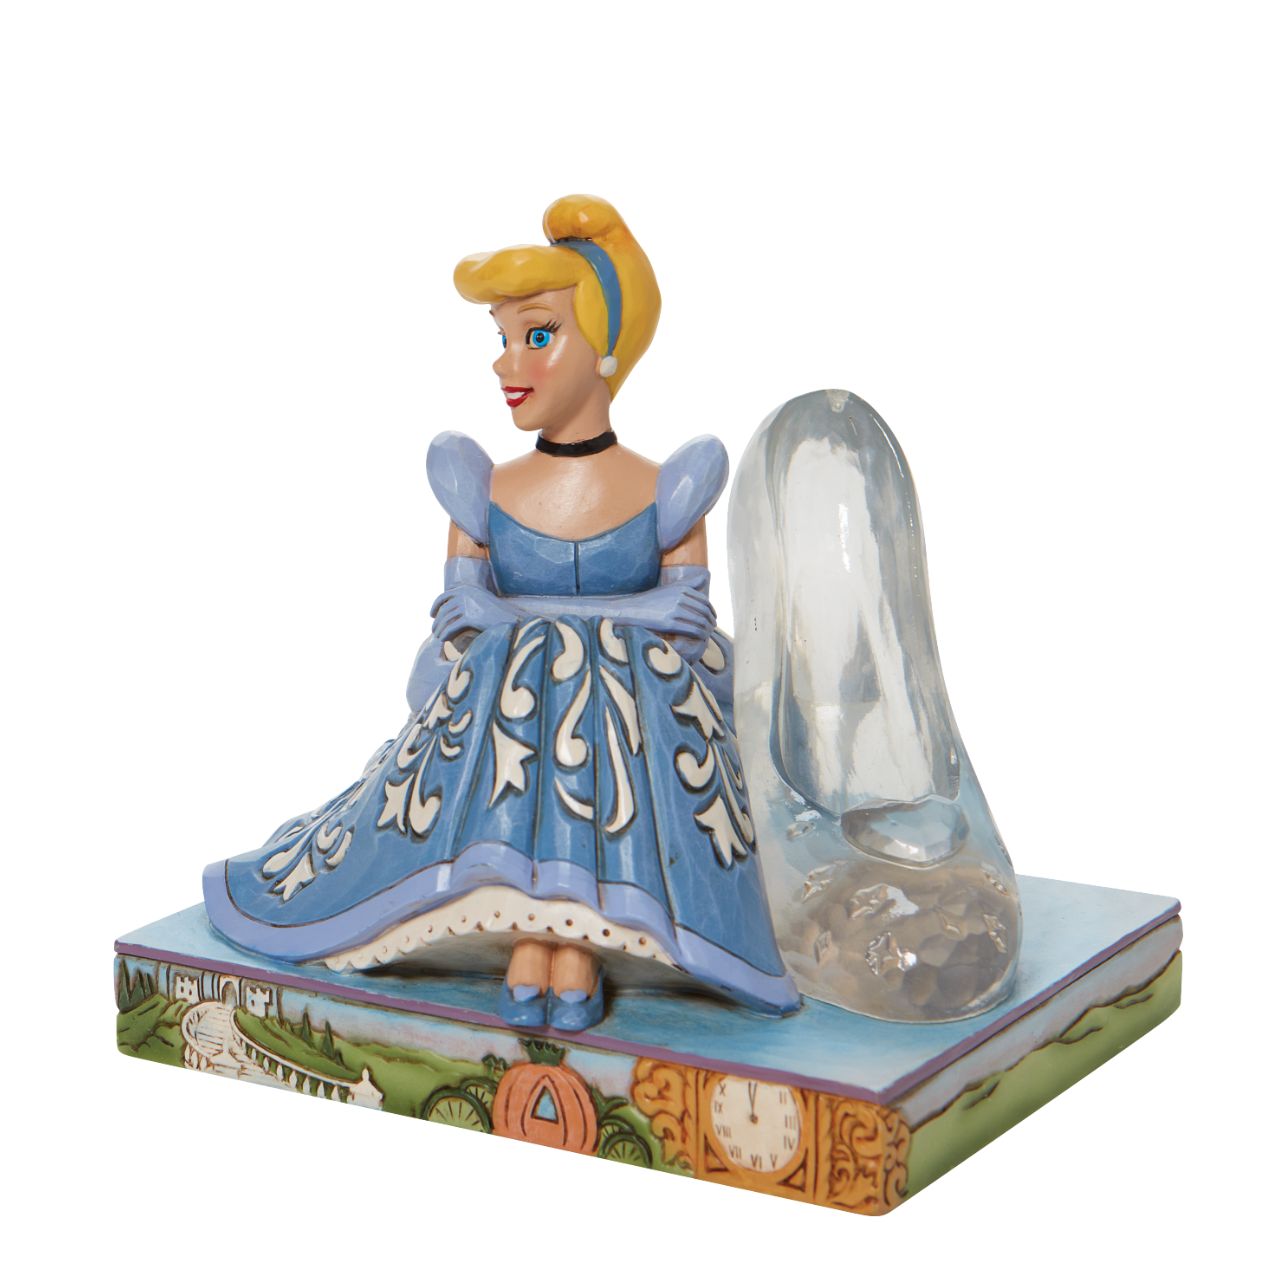 Jim Shore Disney Cinderella Glass Slipper Figurine  This Disney Traditions line by Jim Shore features iconic Walt Disney princesses with their famous props highlighted. With a base illustrating her story, this piece features Cinderella in her brilliant blue gown with a glass slipper.